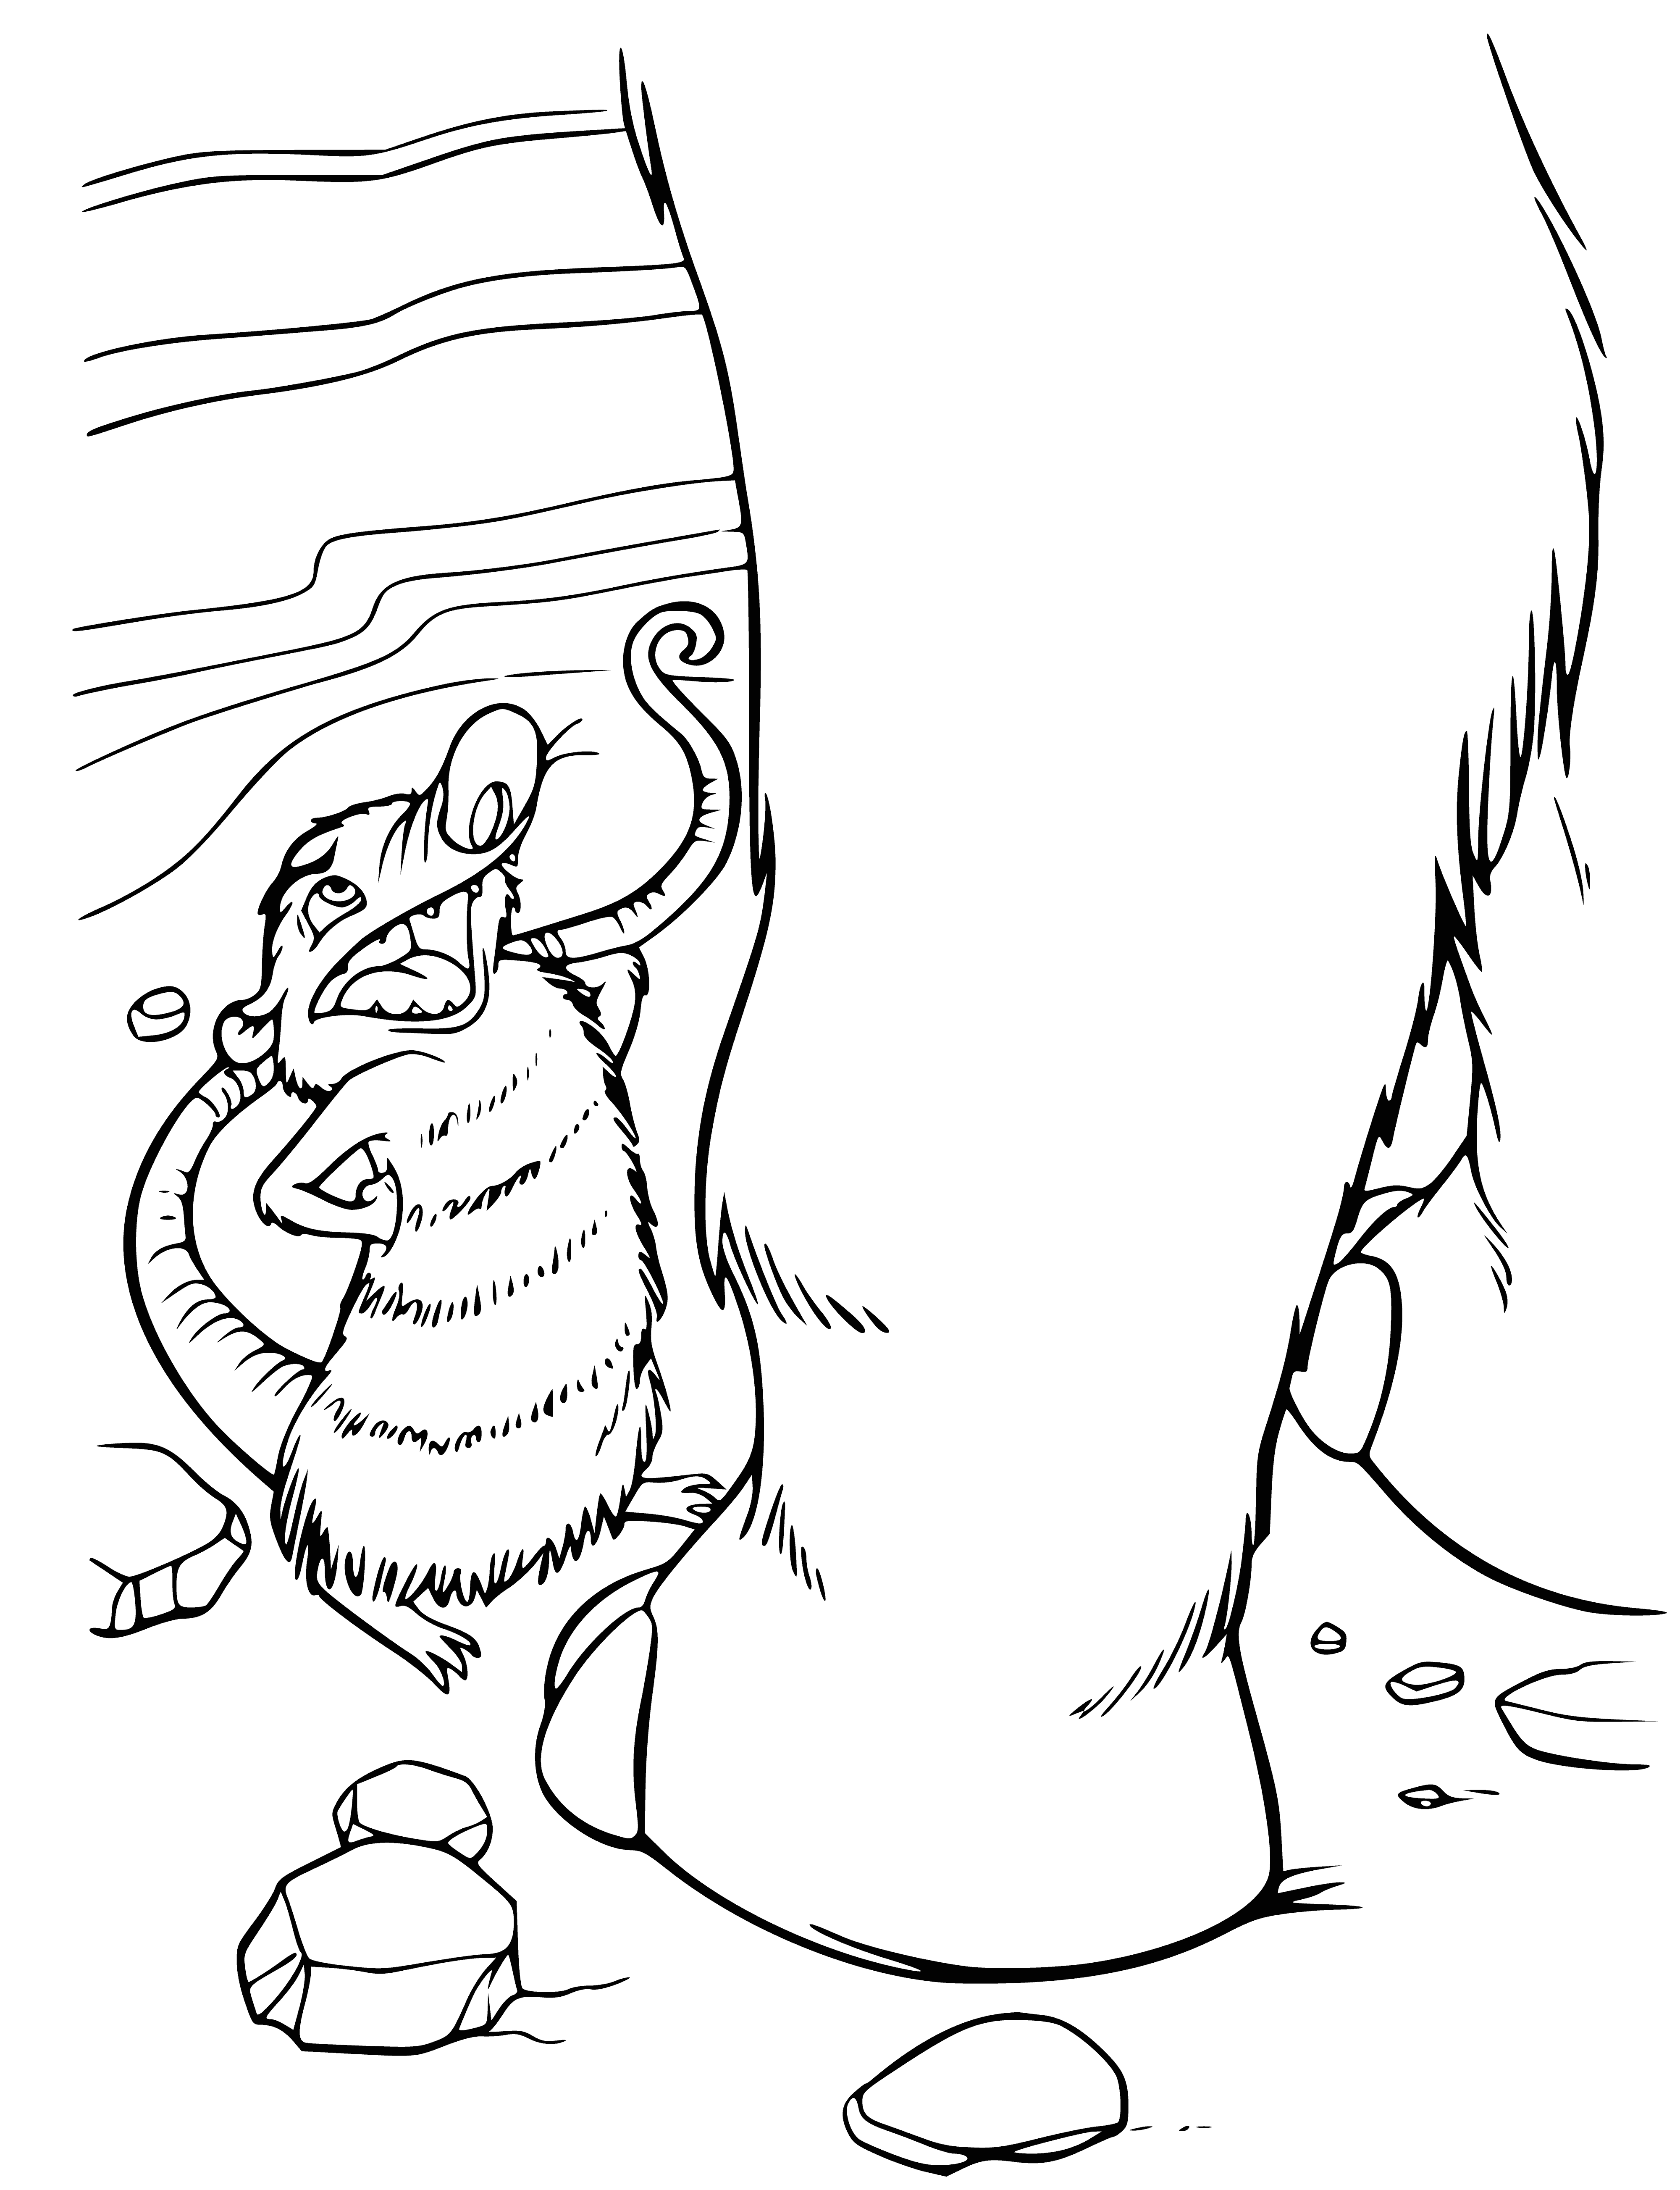 Opossum and mammoth coloring page